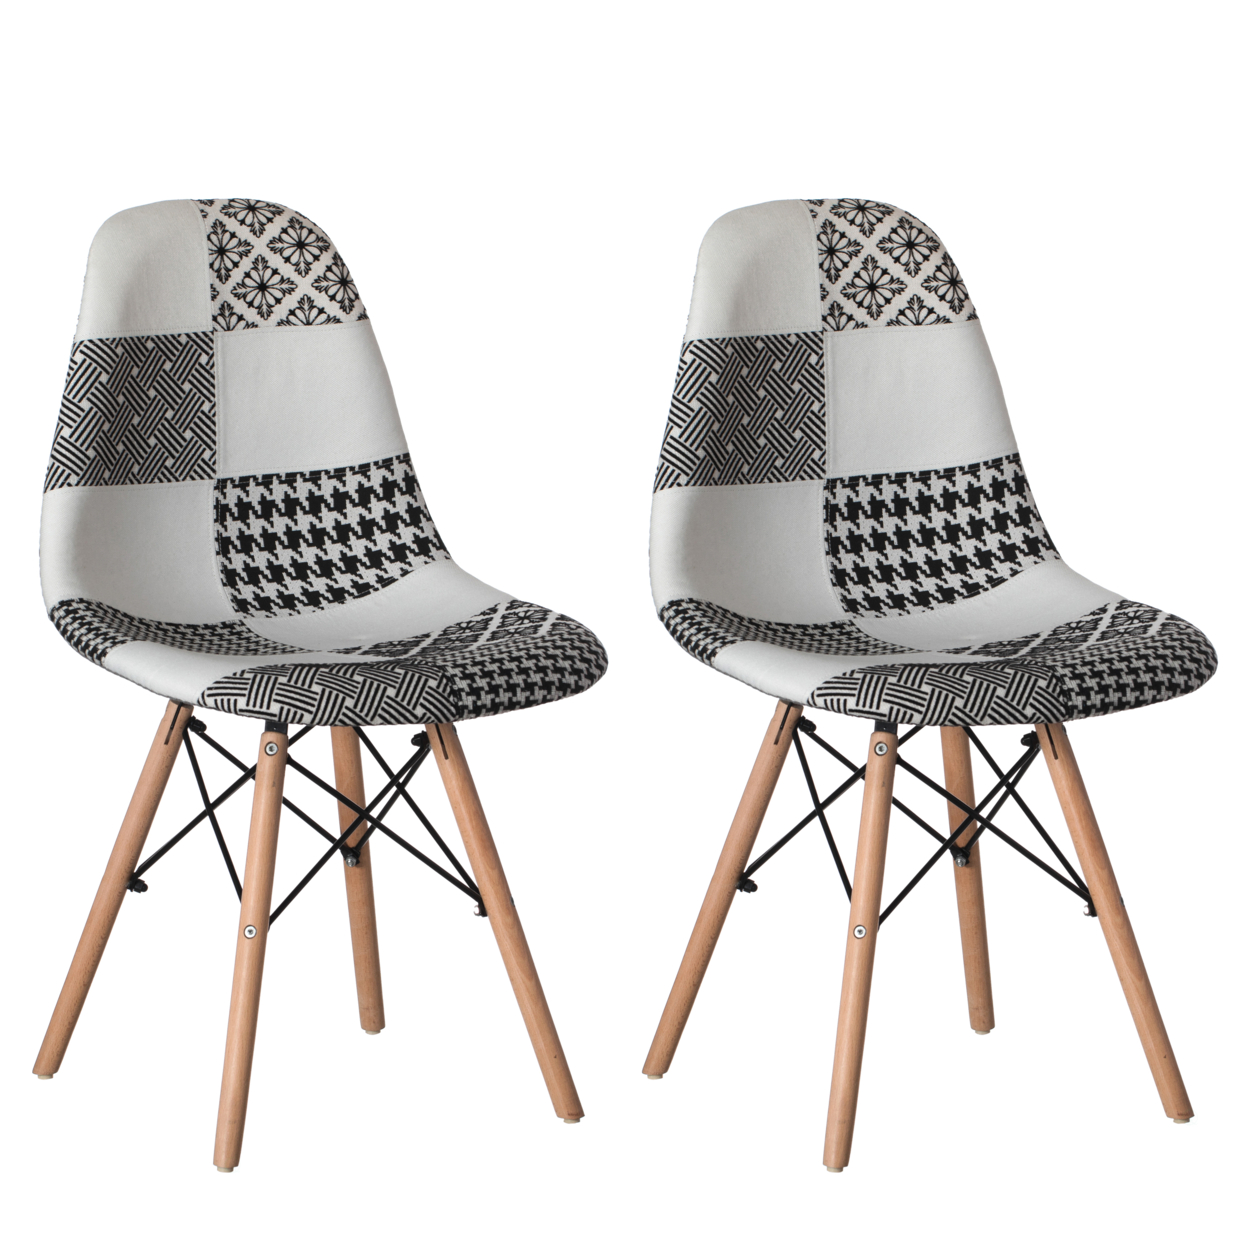 Modern Fabric Patchwork Chair With Wooden Legs For Kitchen, Dining Room, Entryway, Living Room With Black & White Patterns - Set Of 2